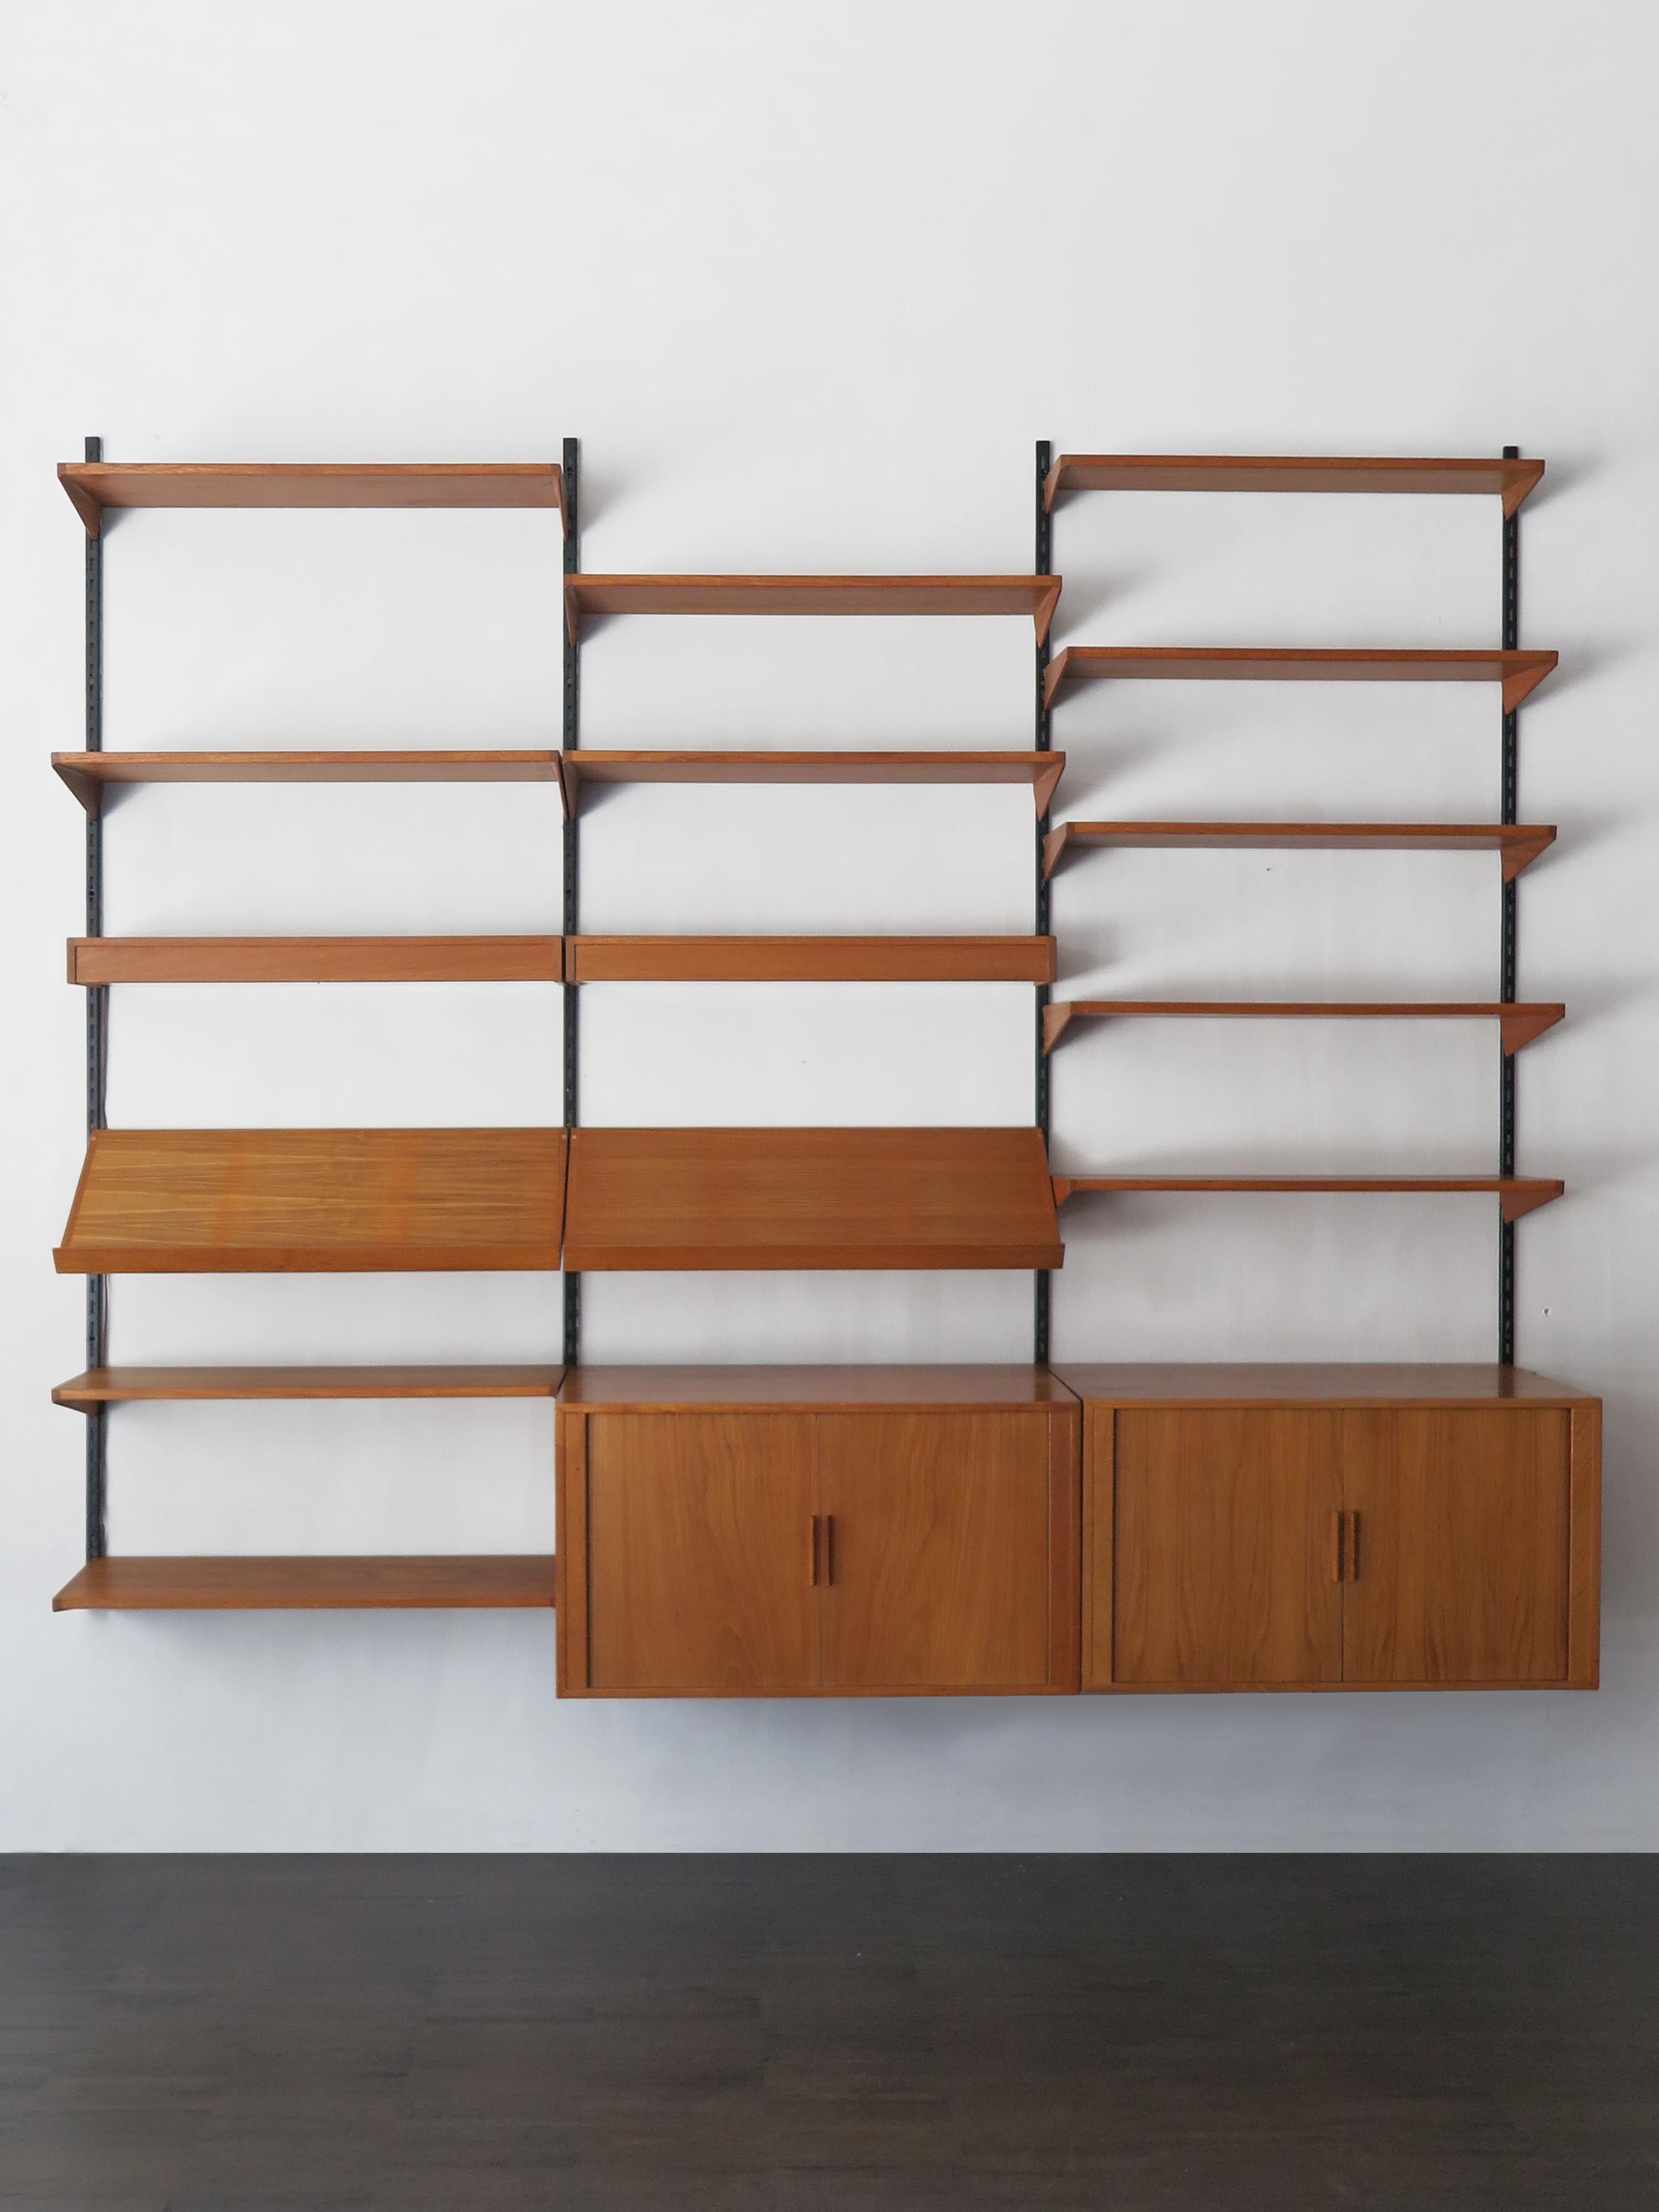 Scandinavian teak oak shelving system designed by Danish designer Kai Kristiansen for FM Mobler, wood box and shelves can be positioned as desired; manufacture label., circa 1960.
Original wood-binary tracks, see photo.

Please note that the item